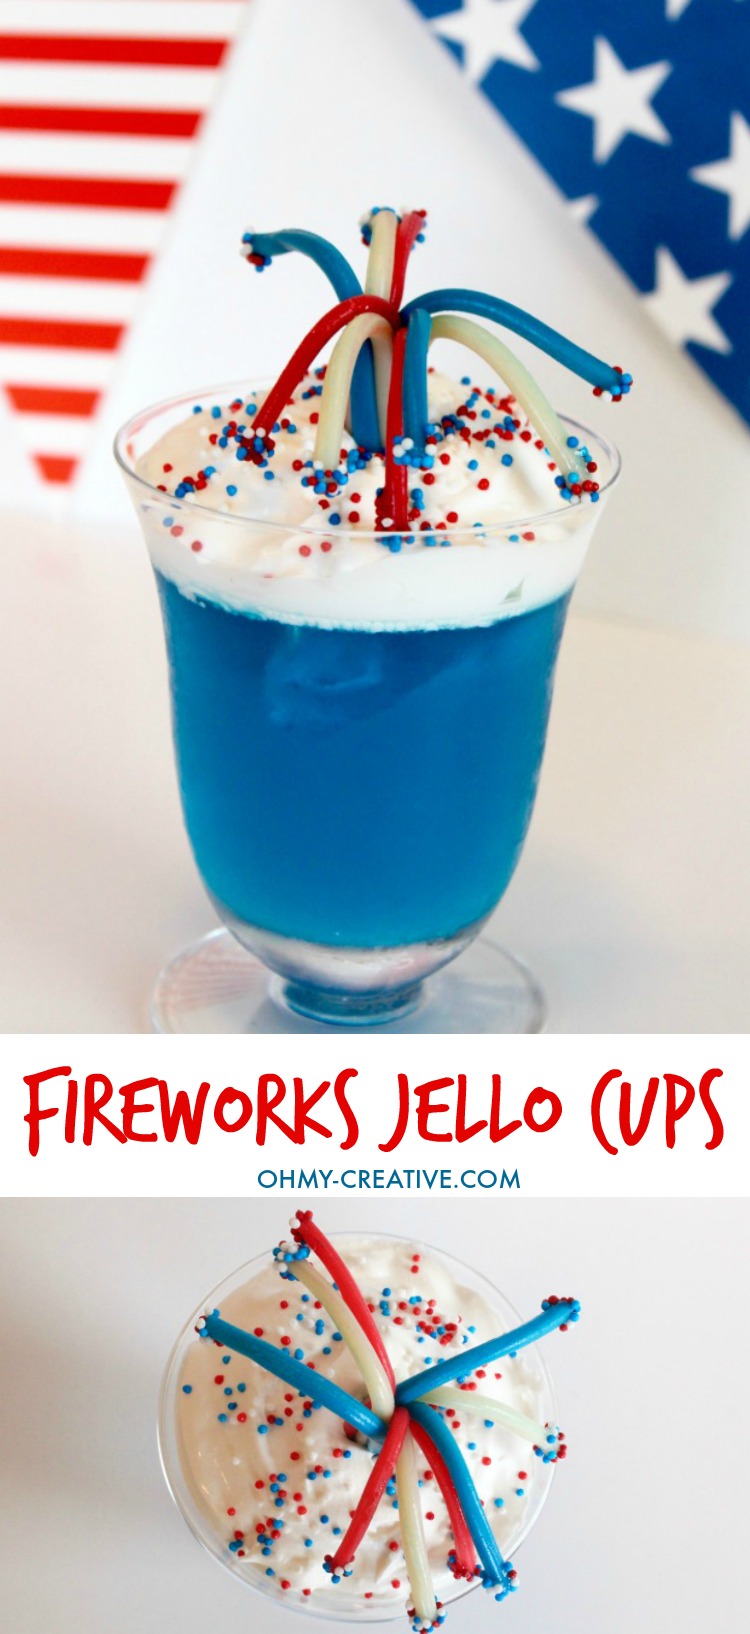 Sparklers and fireworks are a big part of any Fourth of July or any Patriotic Celebration! Try these 4th of July Dessert Fireworks Jello Cups for your picnics and parties - a fun easy patriotic treat! | OHMY-CREATIVE.COM